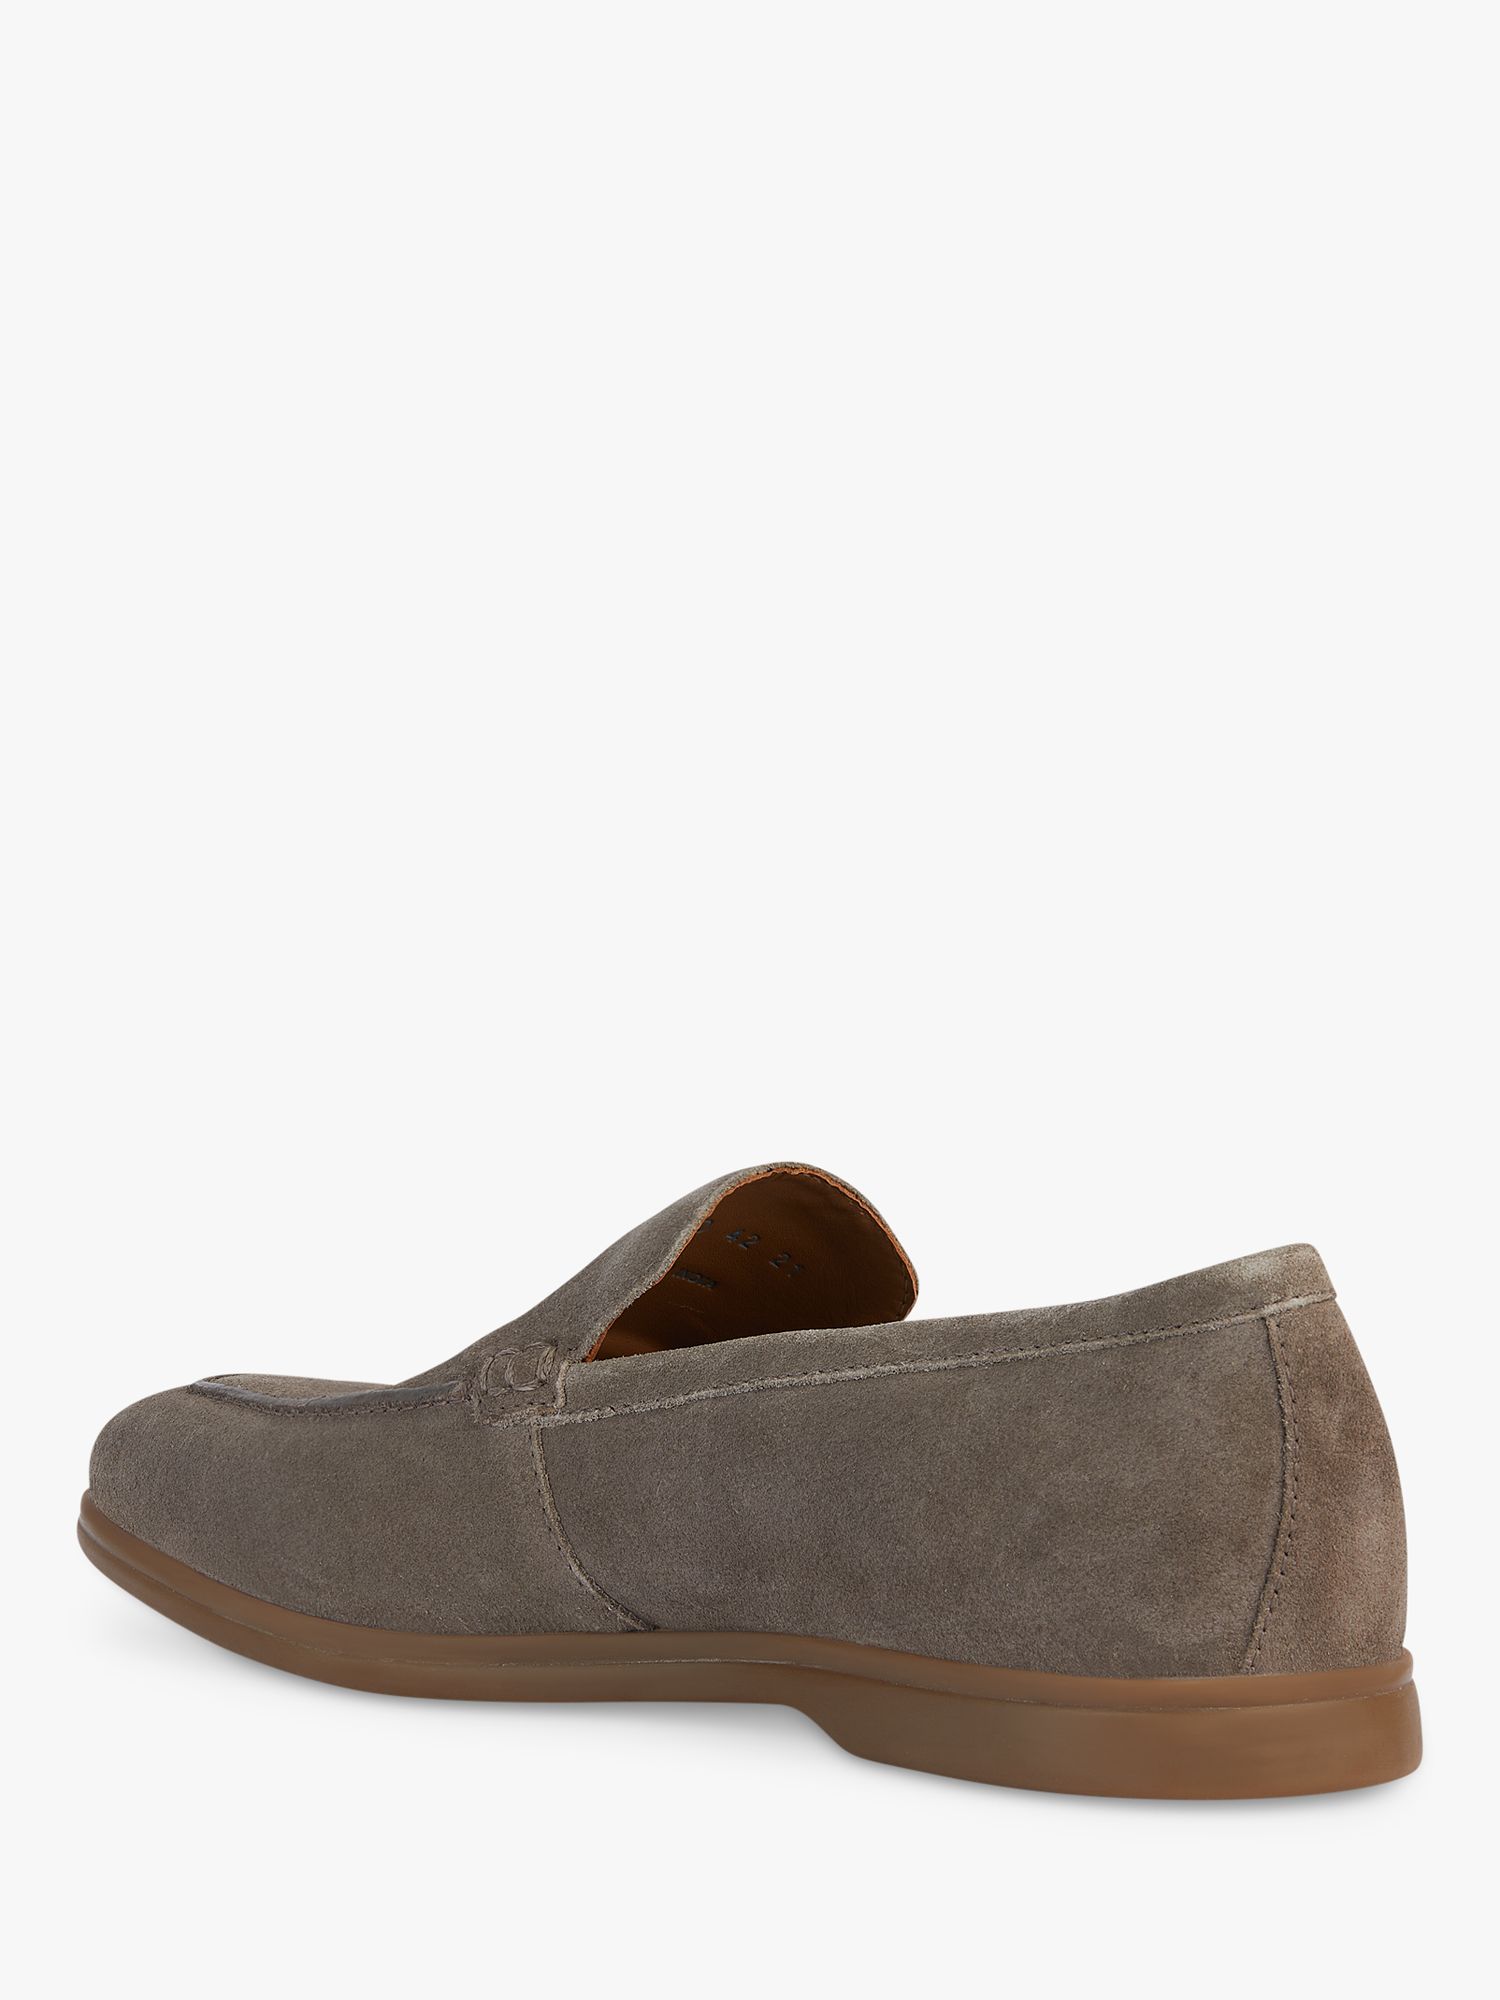 Geox Venzone Loafers, Taupe, EU41